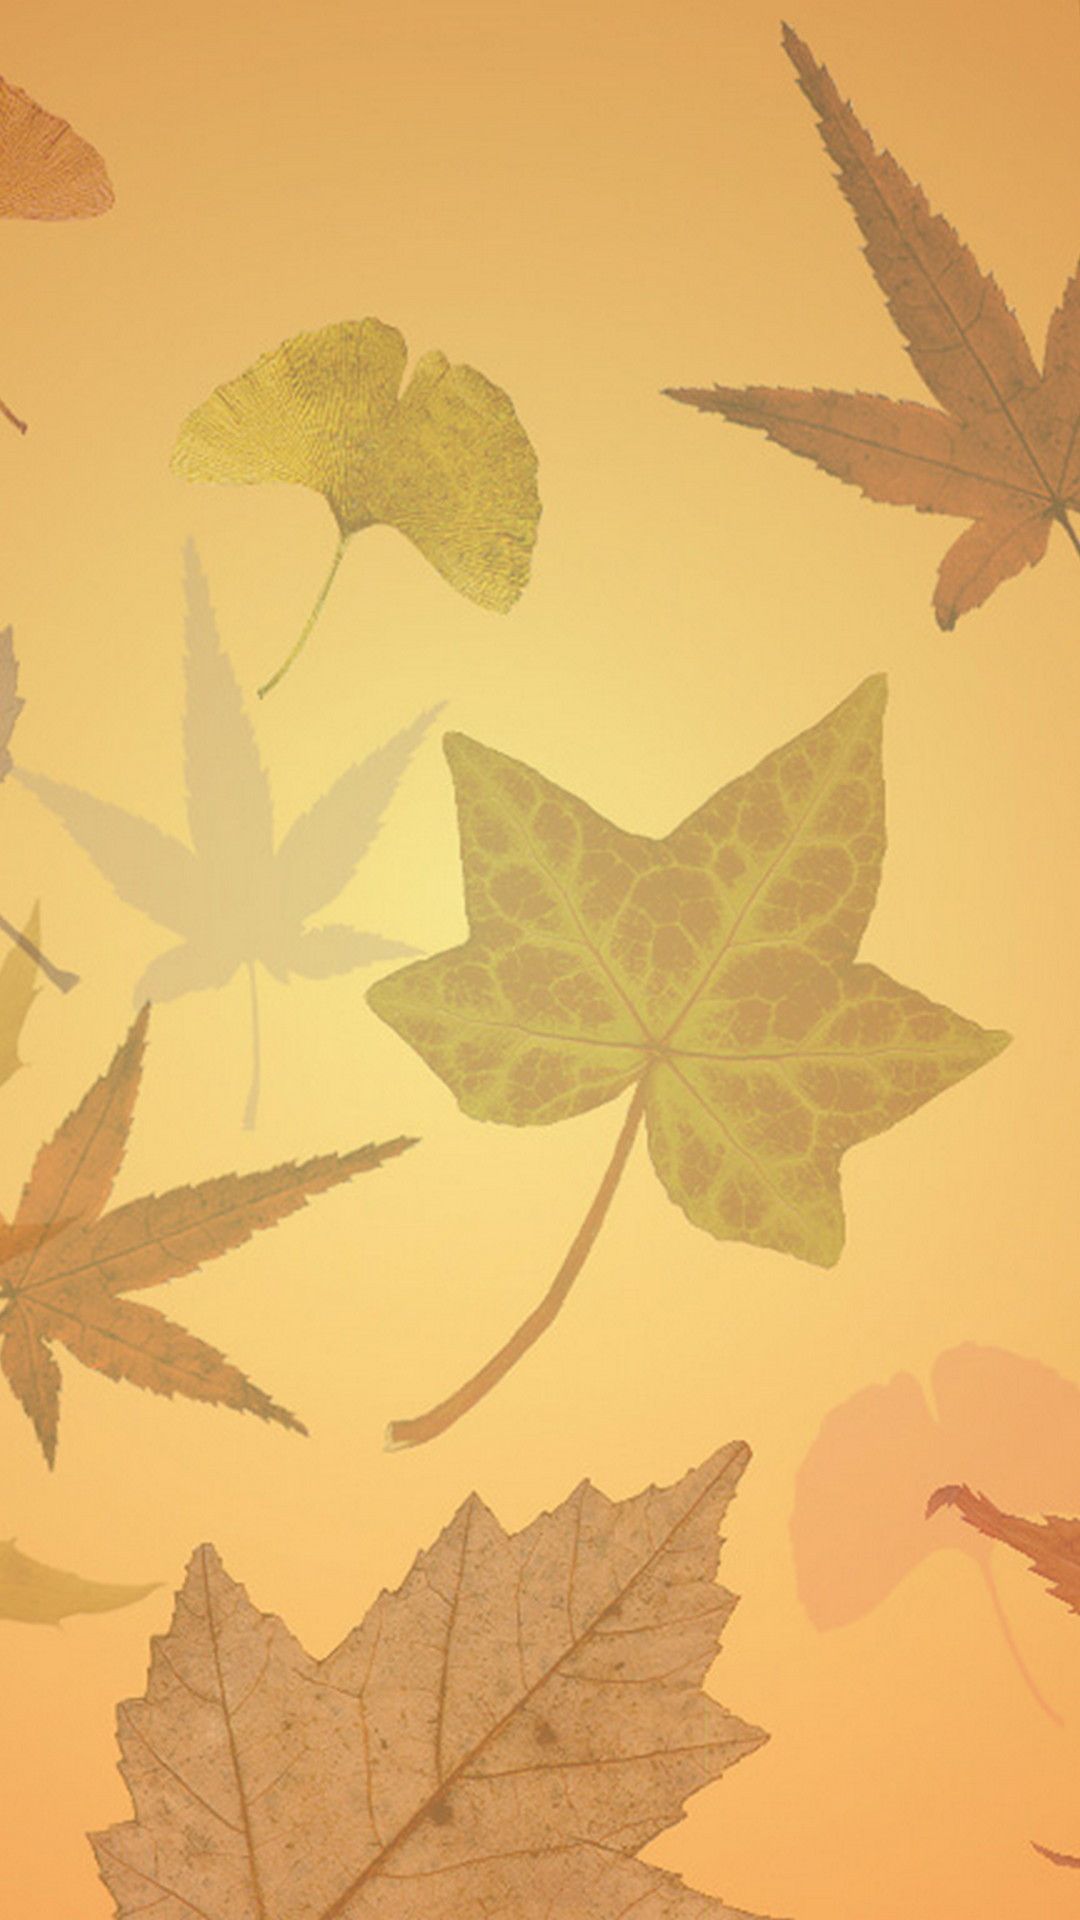 IPhone wallpaper with leaves in a gradient of colors - Simple